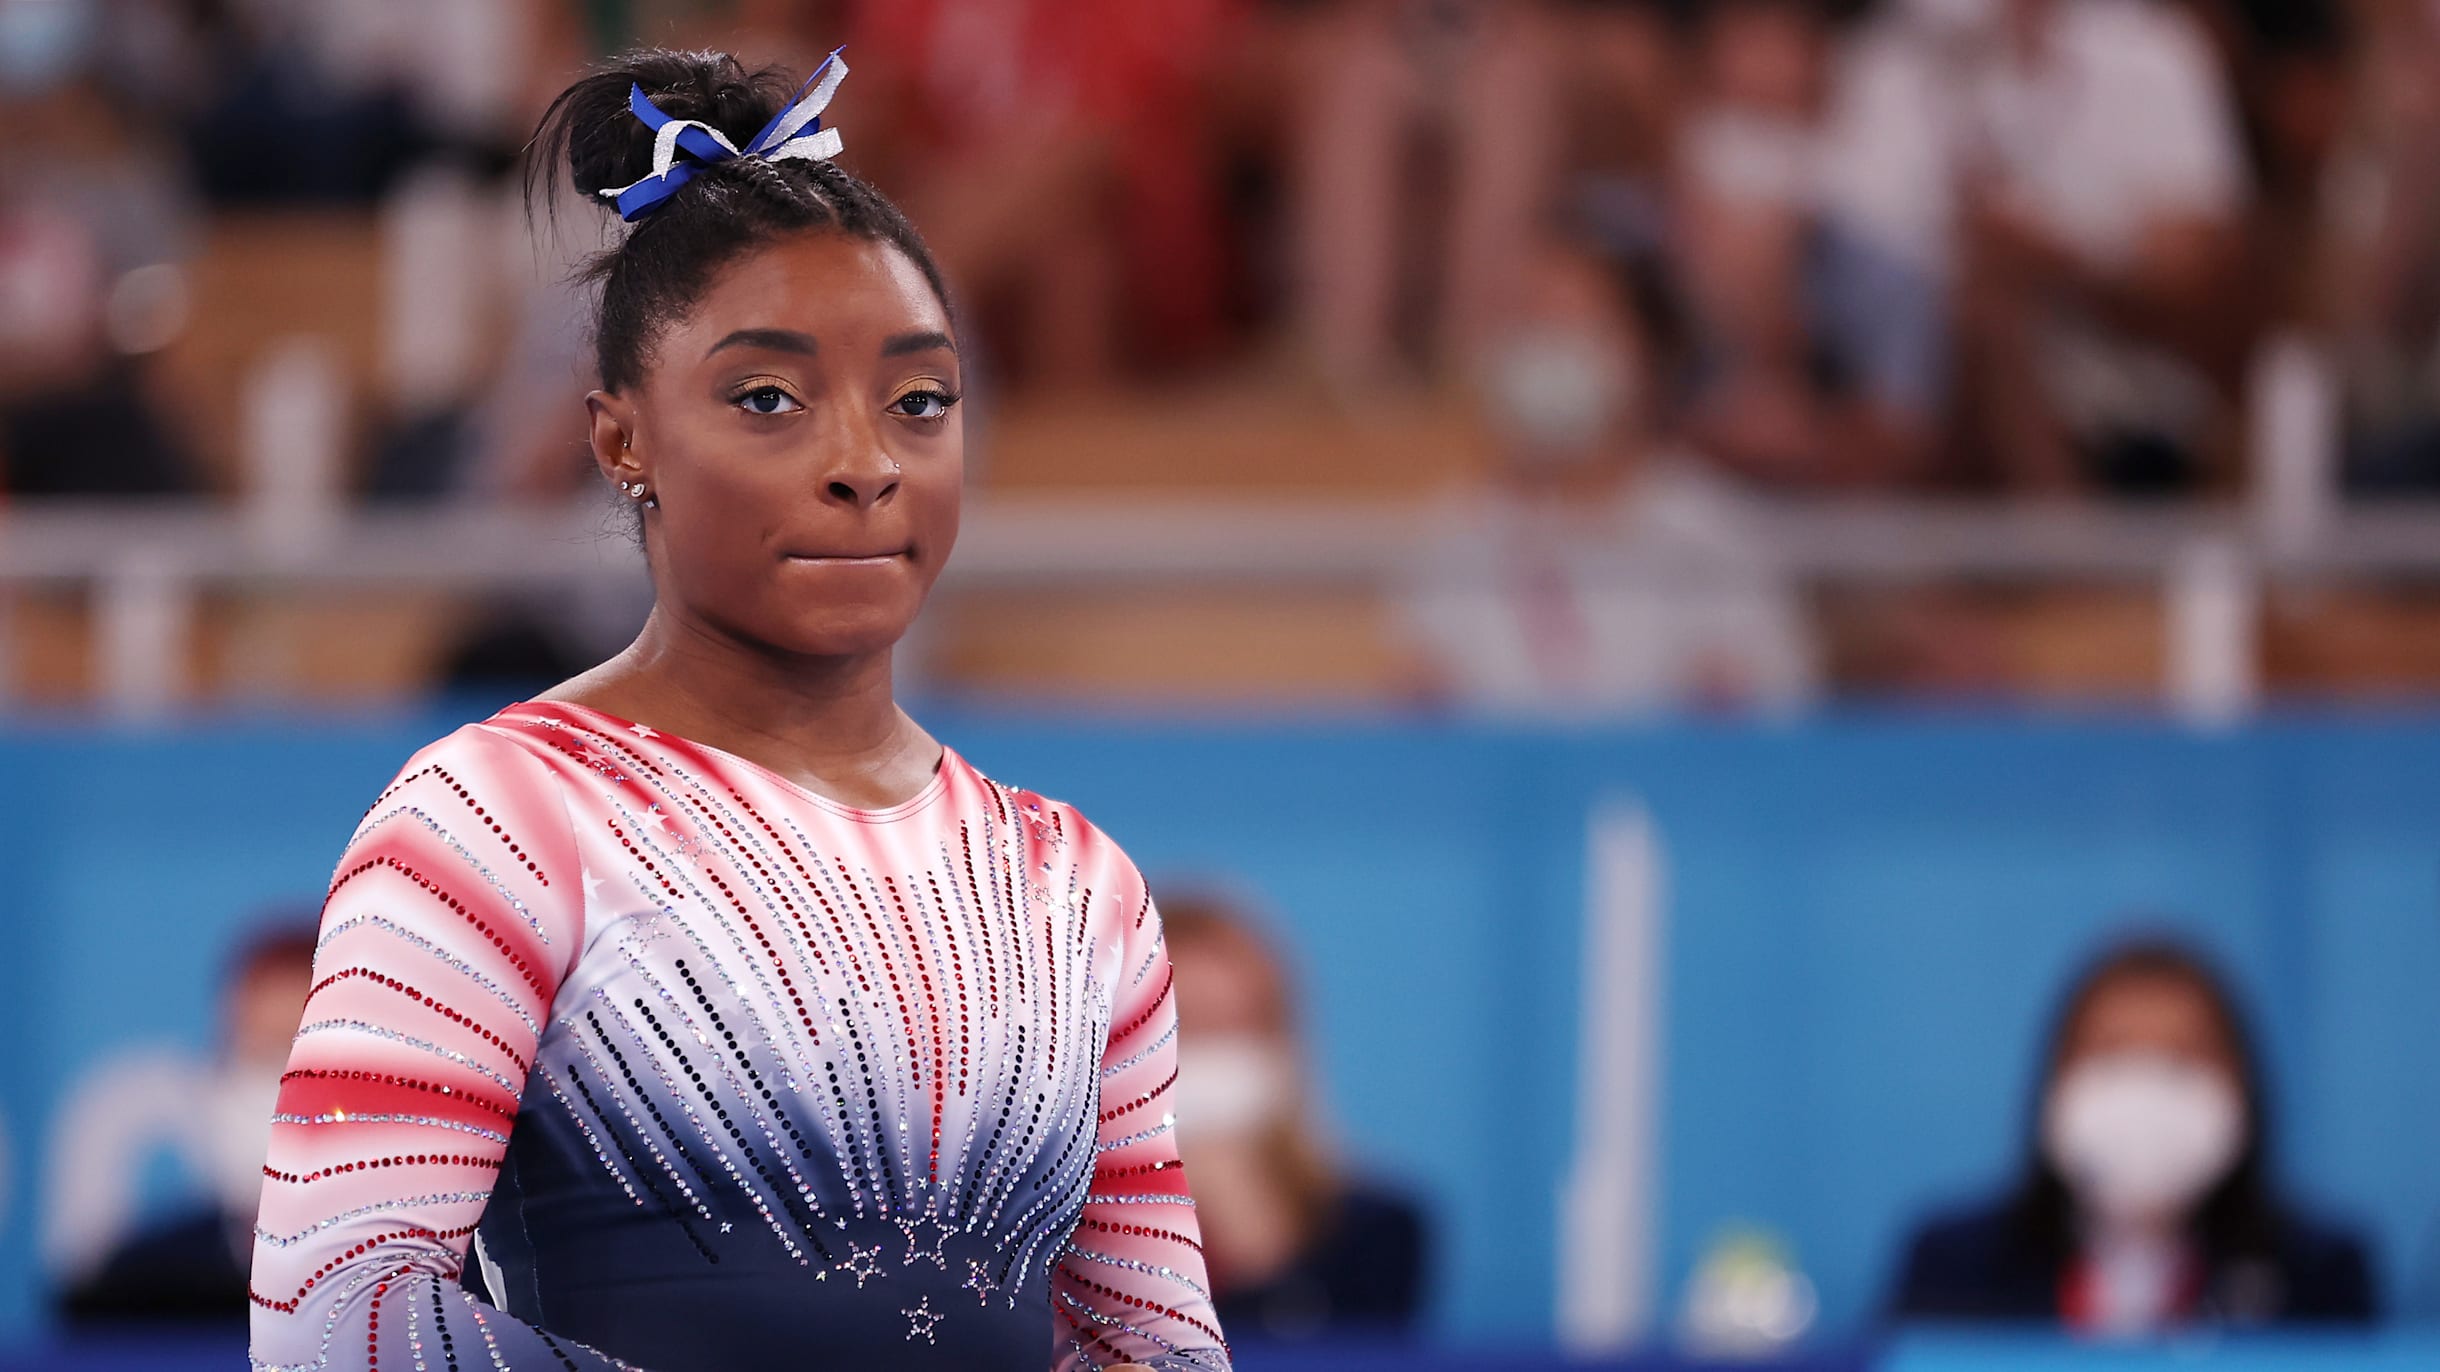 Simone Biles explains competition withdrawal at Olympics: 'My mind